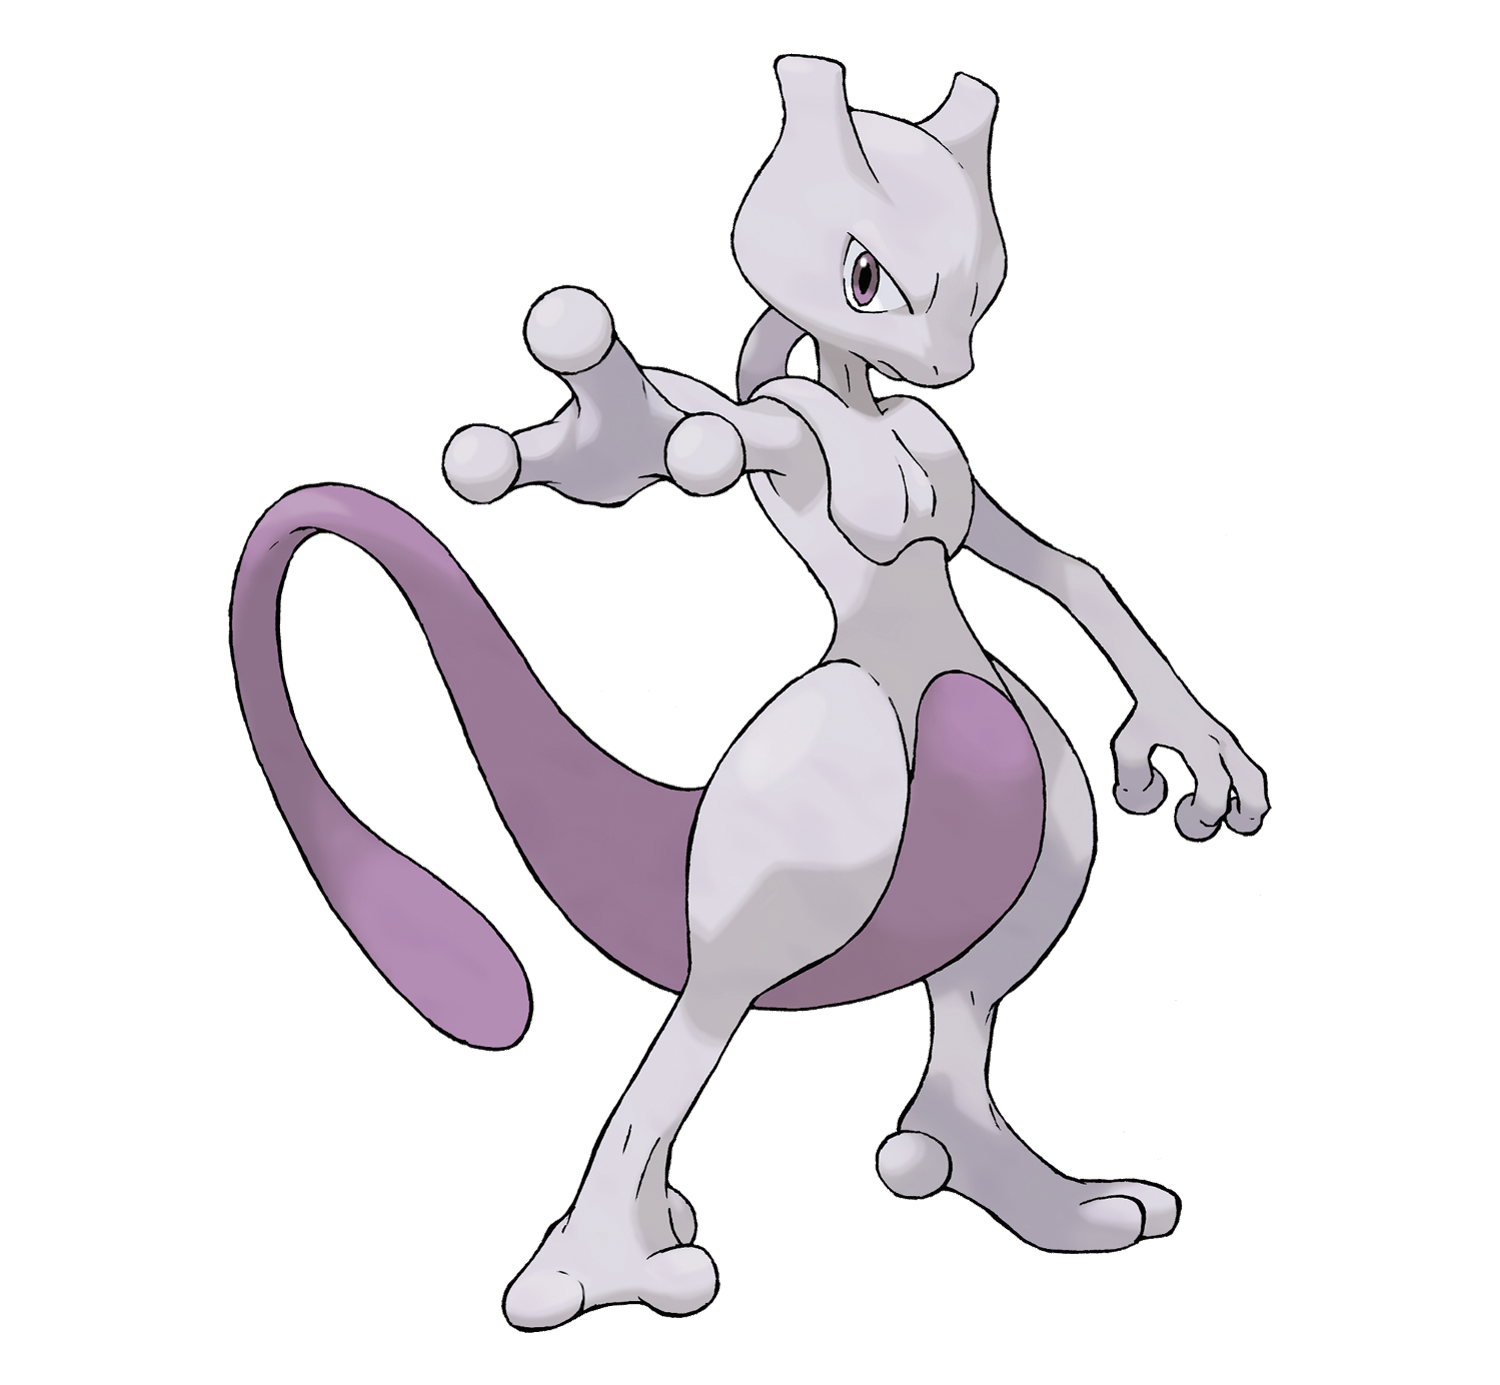 http://images2.wikia.nocookie.net/__cb20091030001440/es.pokemon/images/d/d3/Mewtwo.png